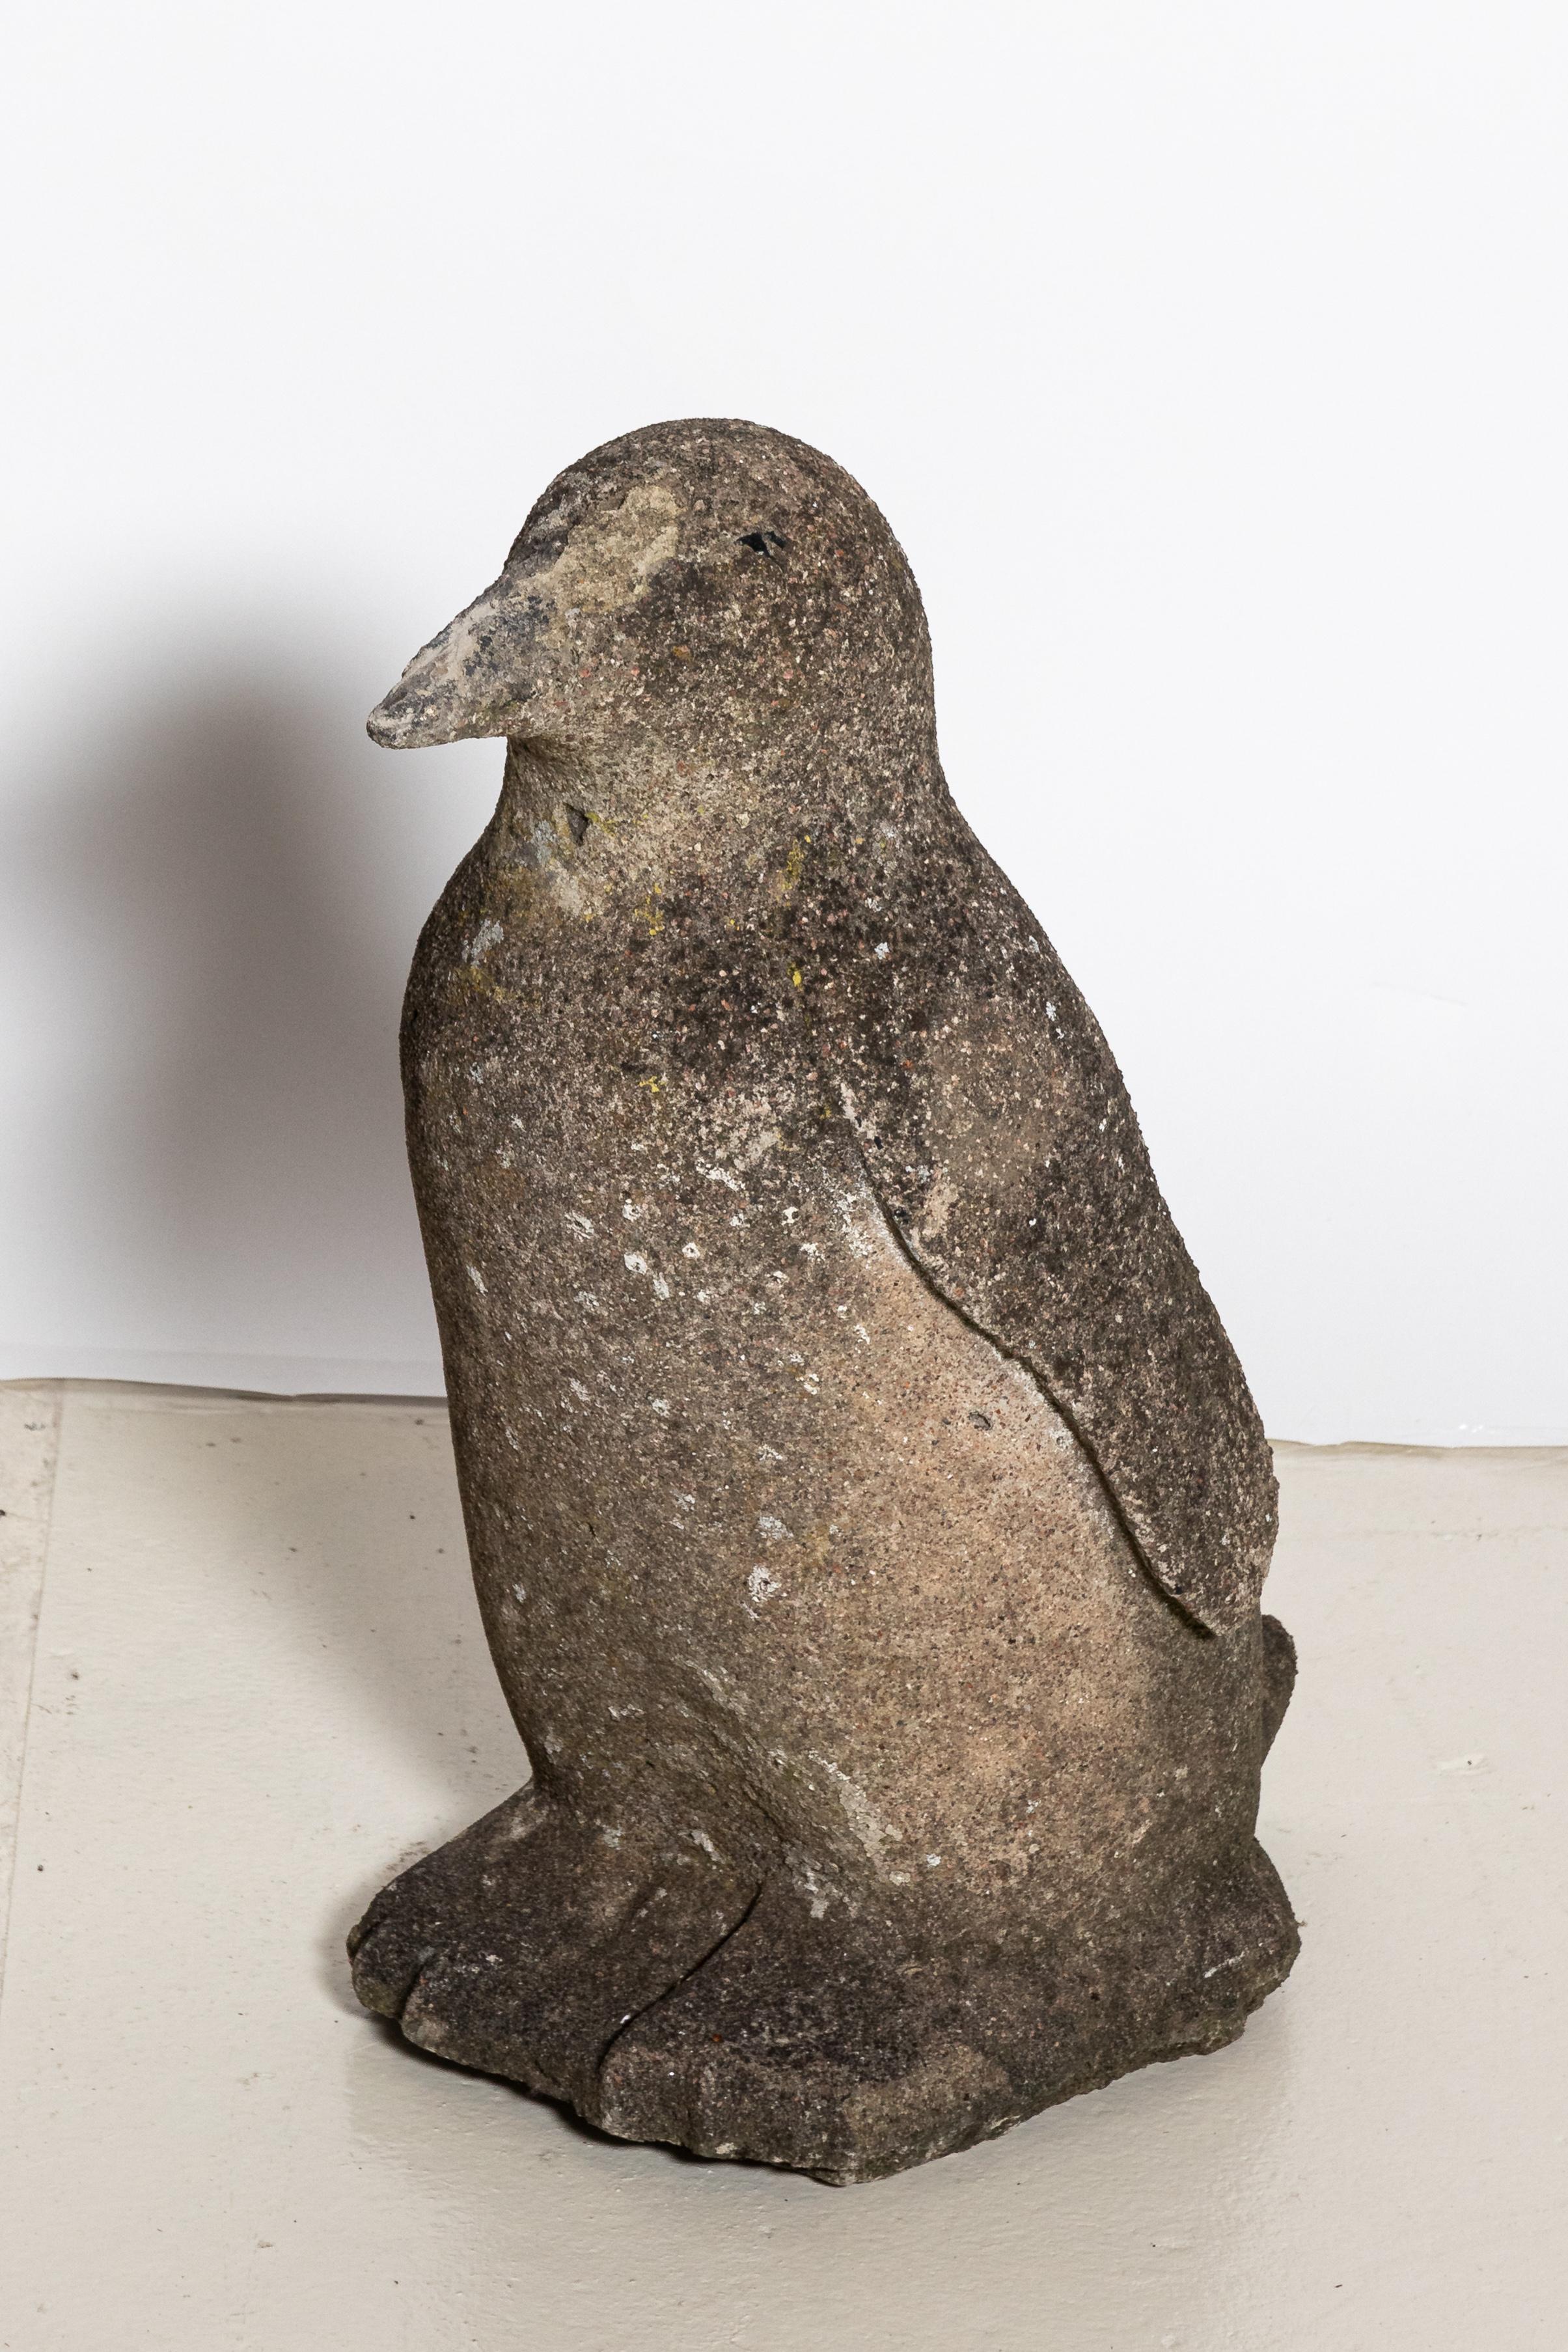 Early 20th century decorative cast stone penguin statue. Made in the United Kingdom. Please note of wear consistent with age including wear and weathering due to exposure to the elements.